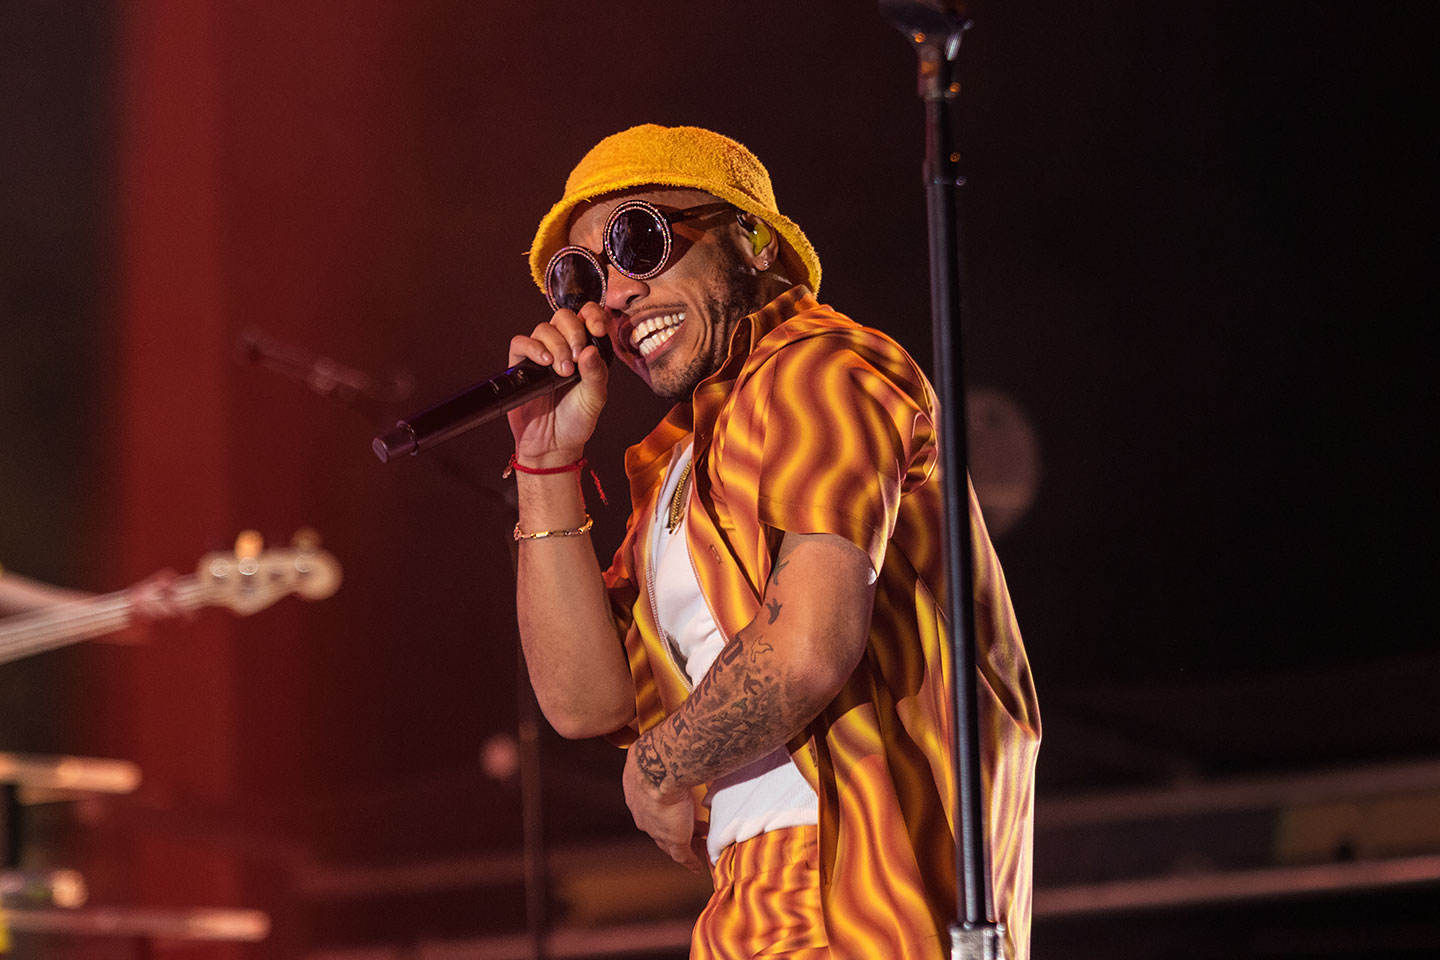 Anderson .Paak at Red Rocks - Denver Concert Photos